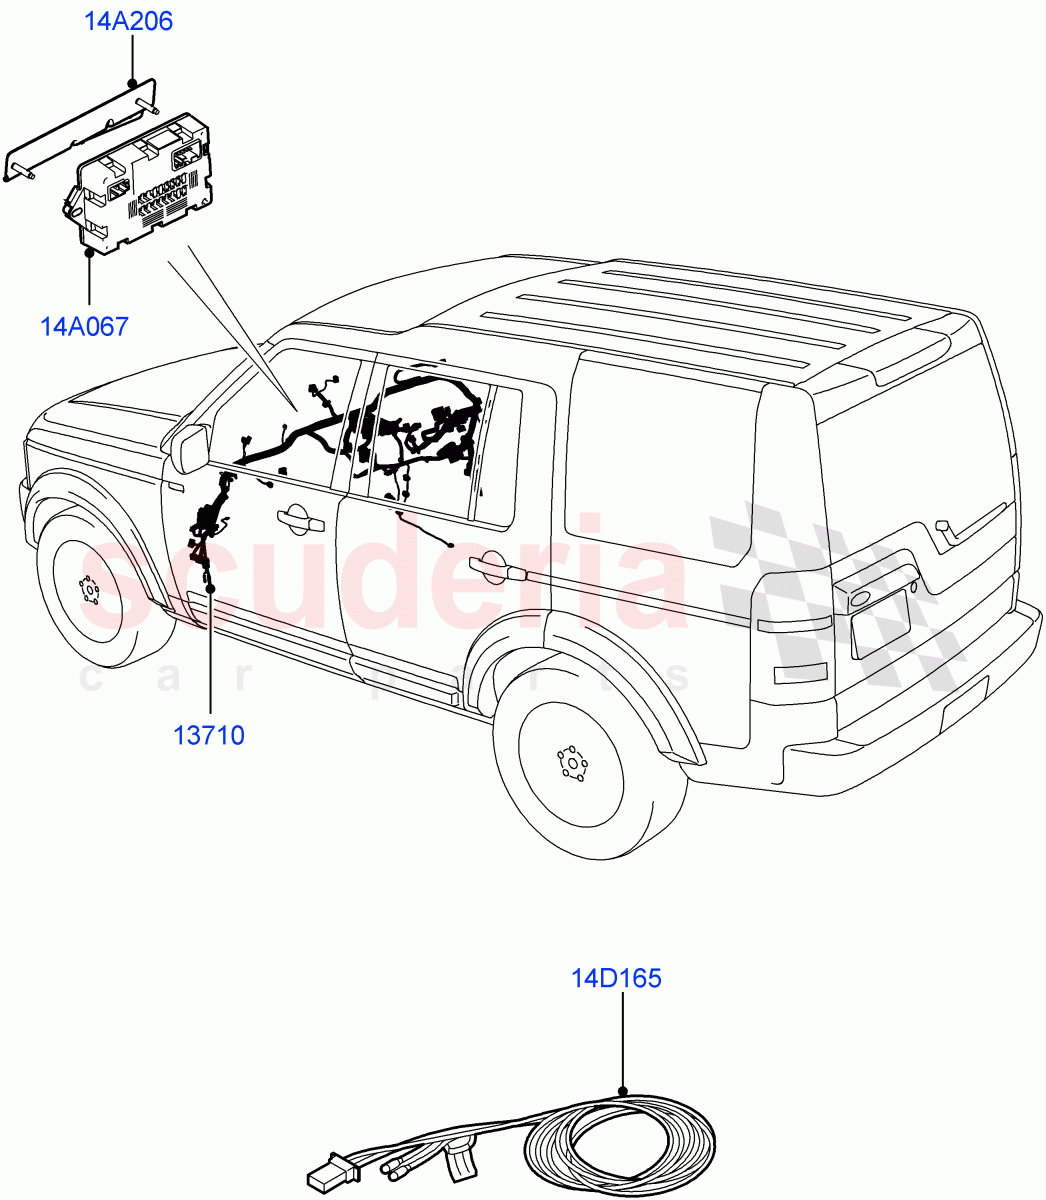 Electrical Wiring - Engine And Dash(Facia)((V)FROMAA000001) of Land Rover Land Rover Discovery 4 (2010-2016) [2.7 Diesel V6]